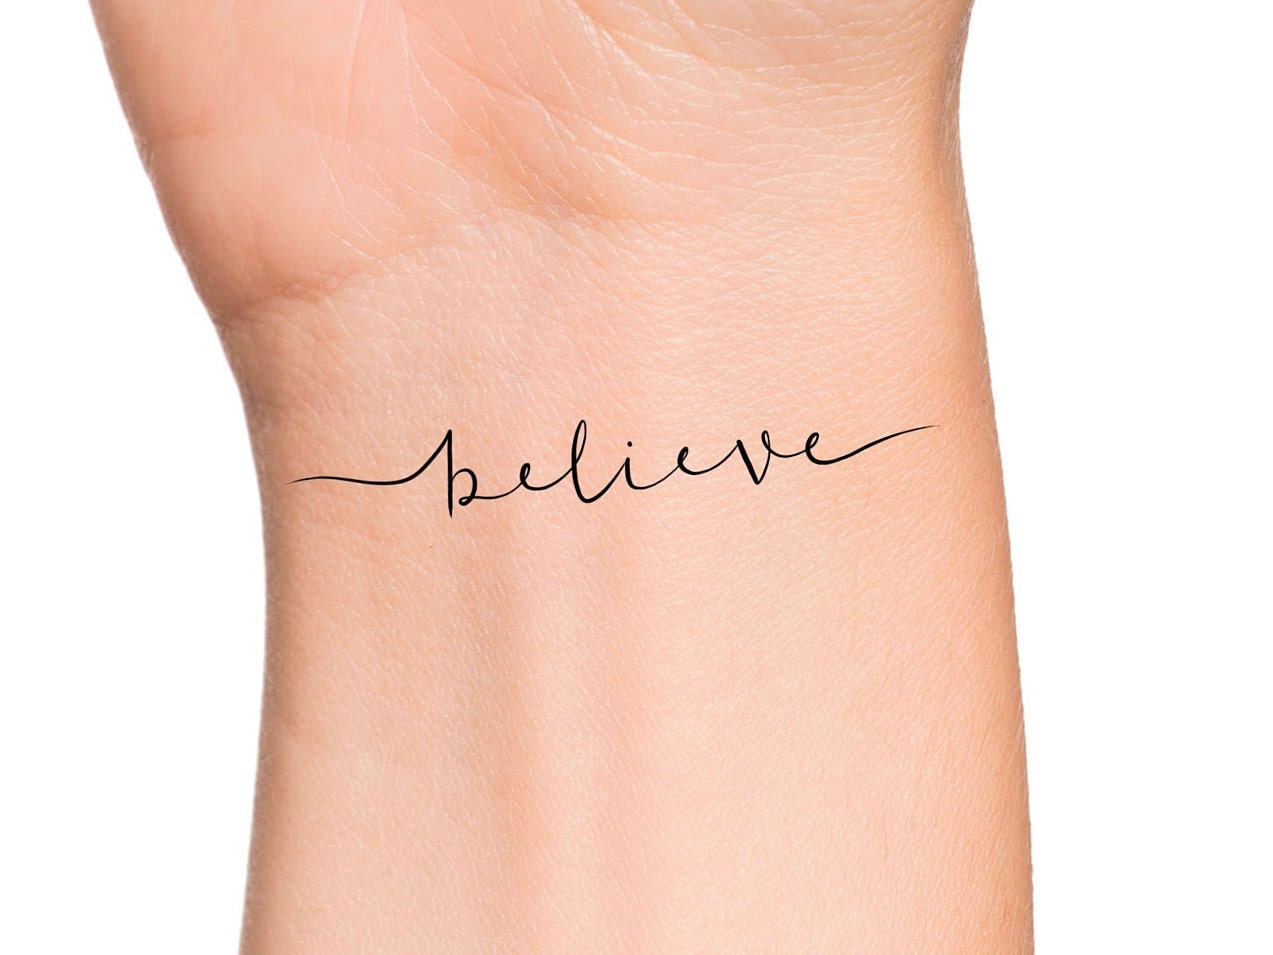 Make it Yourself - Online Tattoo Name Creator | Believe tattoos, One word  tattoos, Meaningful word tattoos